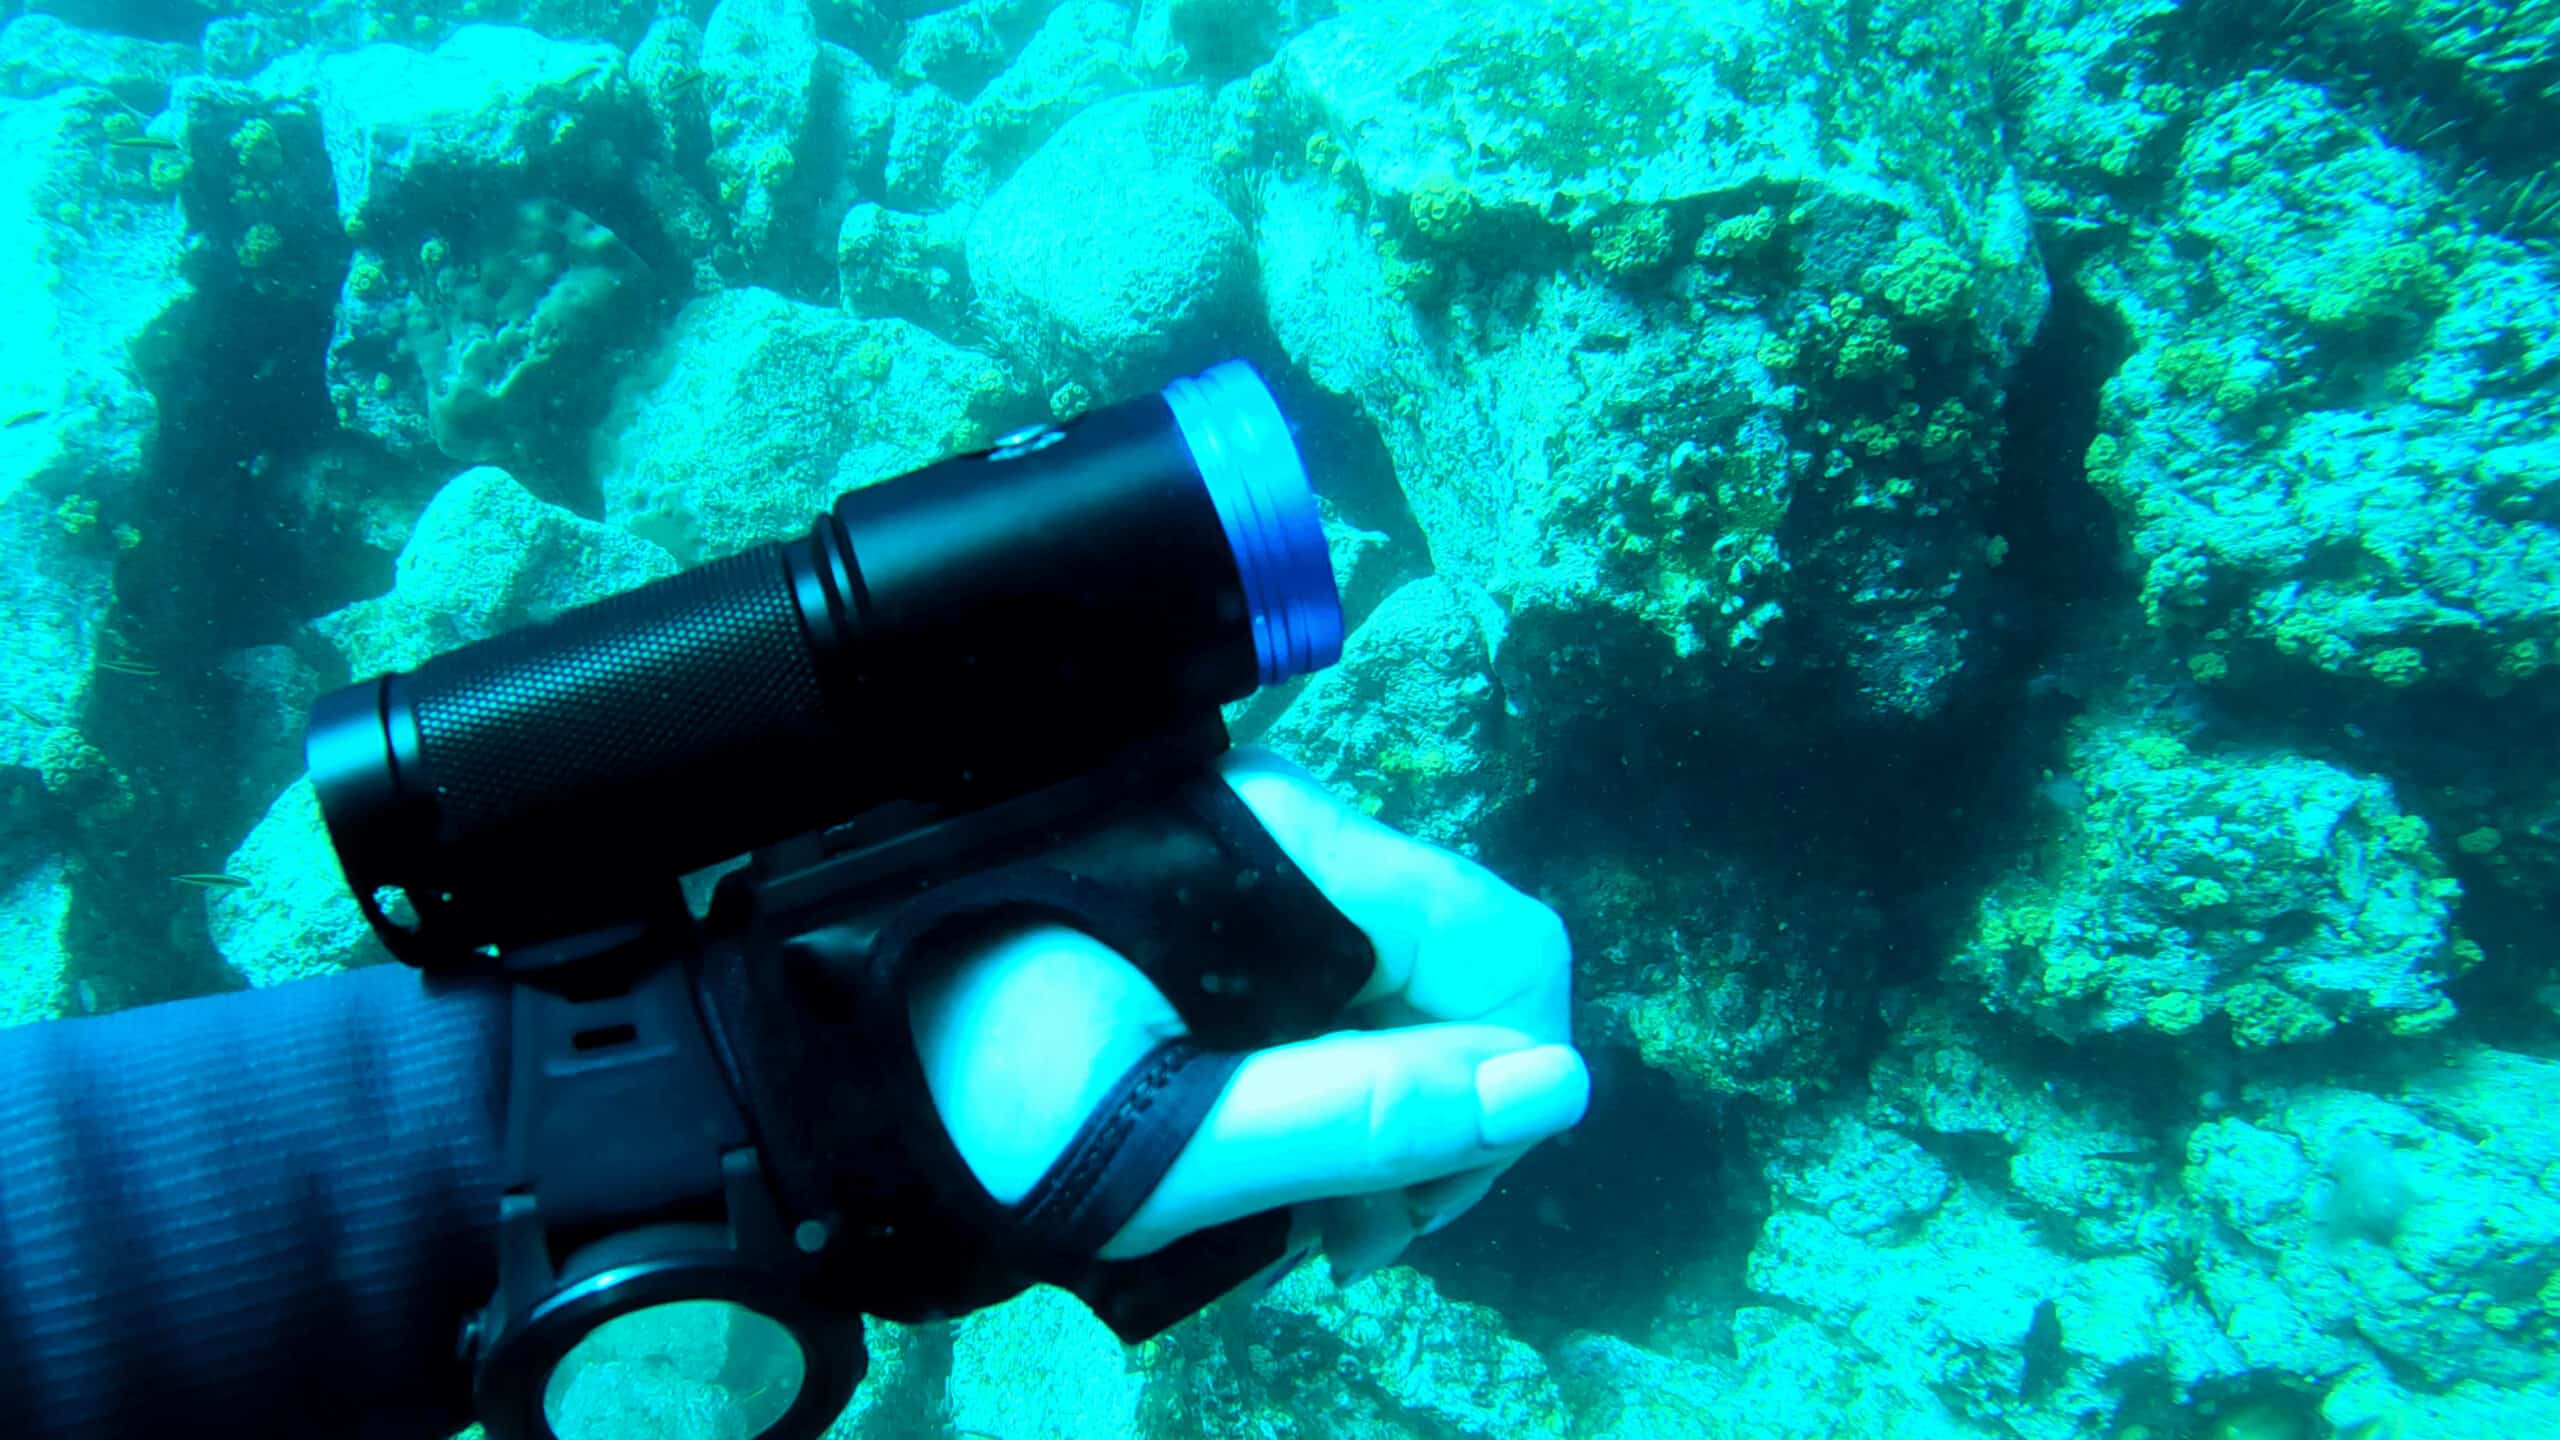 Torch on hand underwater with coral in the background